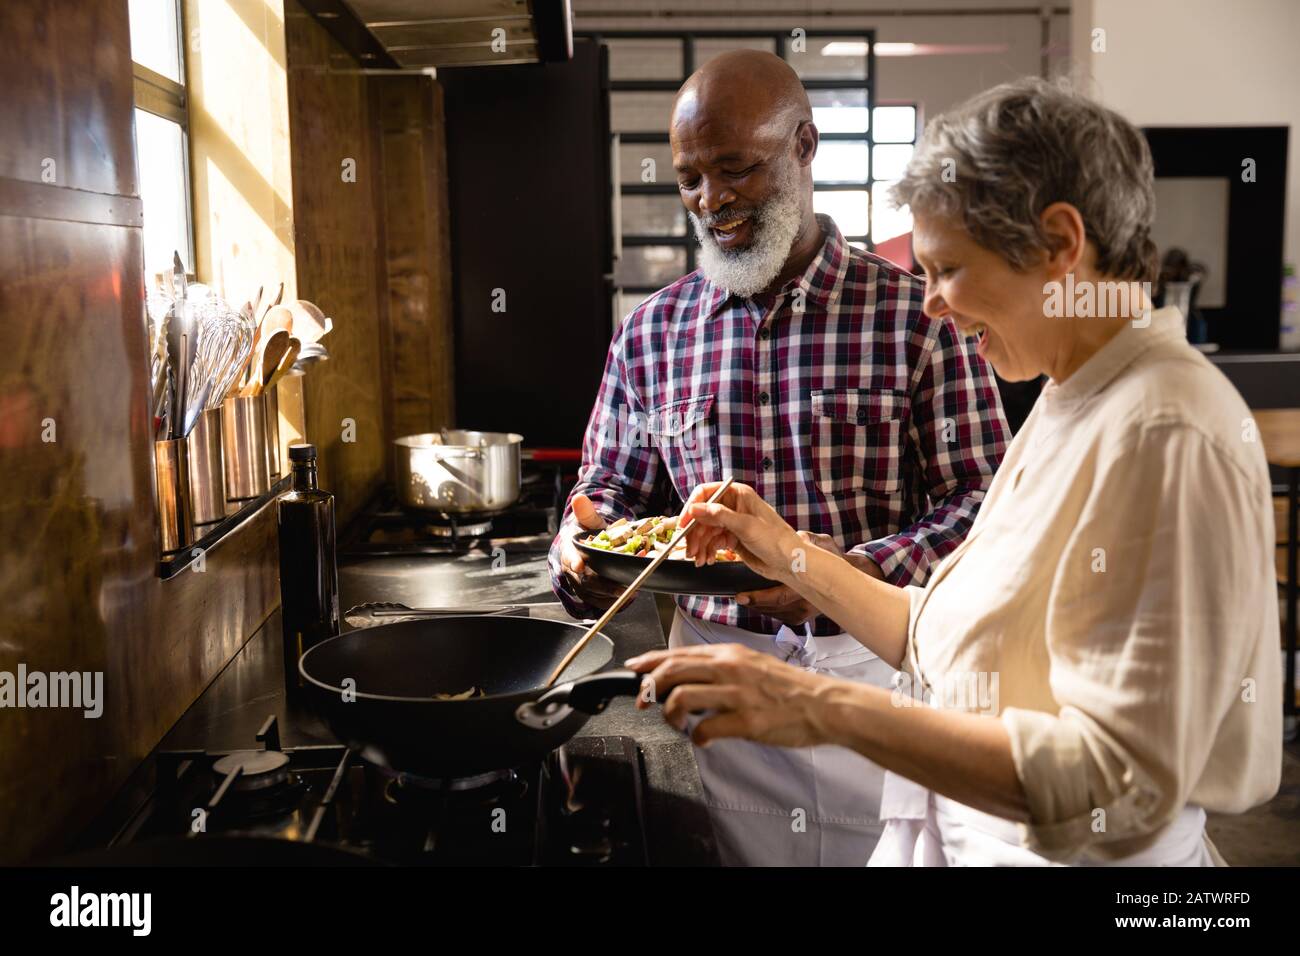 Old chefs cooking together Stock Photo